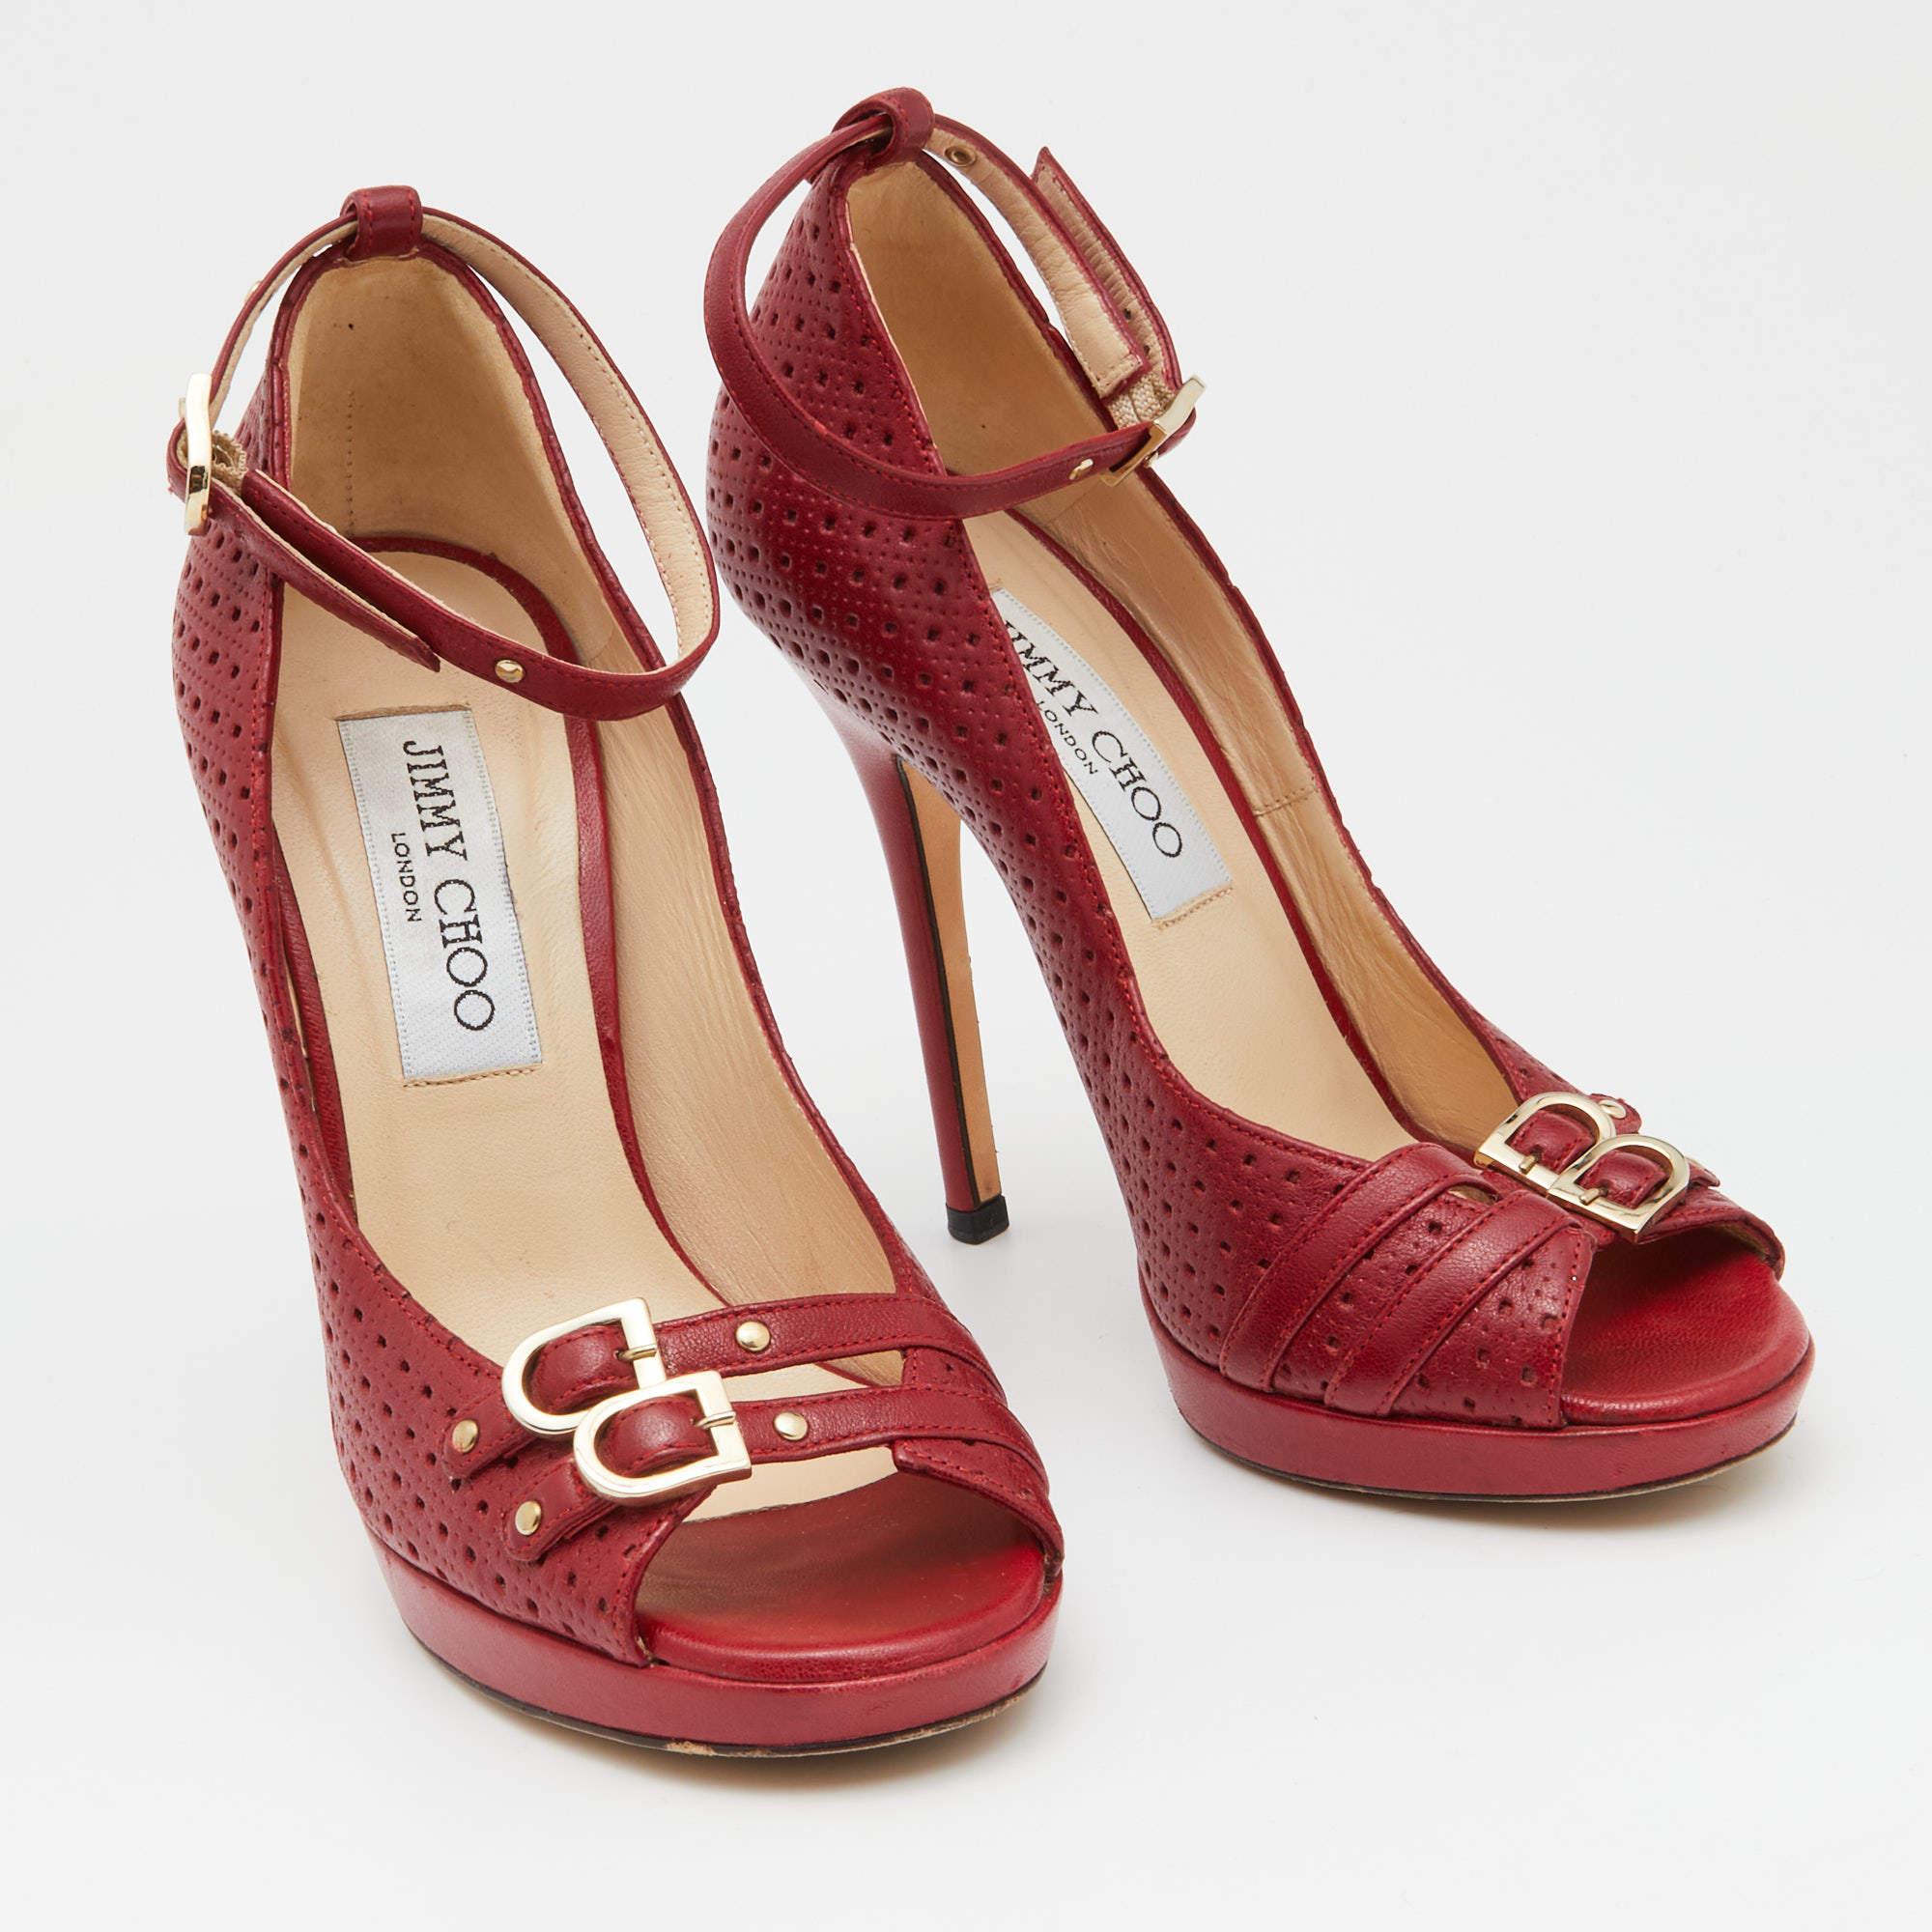 Jimmy Choo Red Perforated Leather Peep Toe Pumps Size 35 3